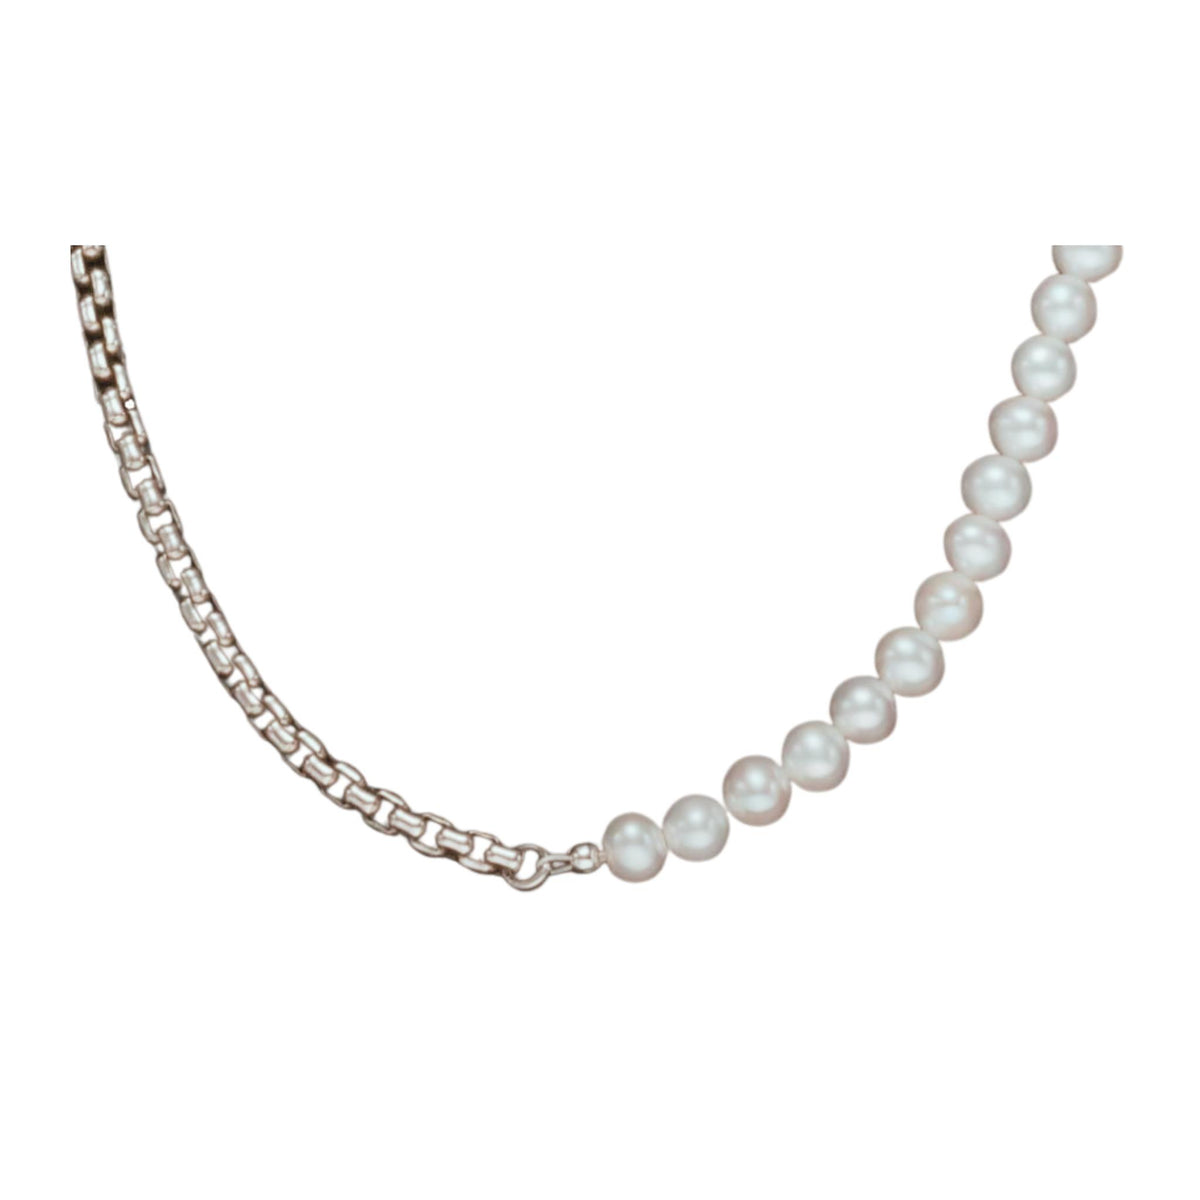 William Henry - 'Frost Line' 22" Sterling Silver and Pearl Necklace